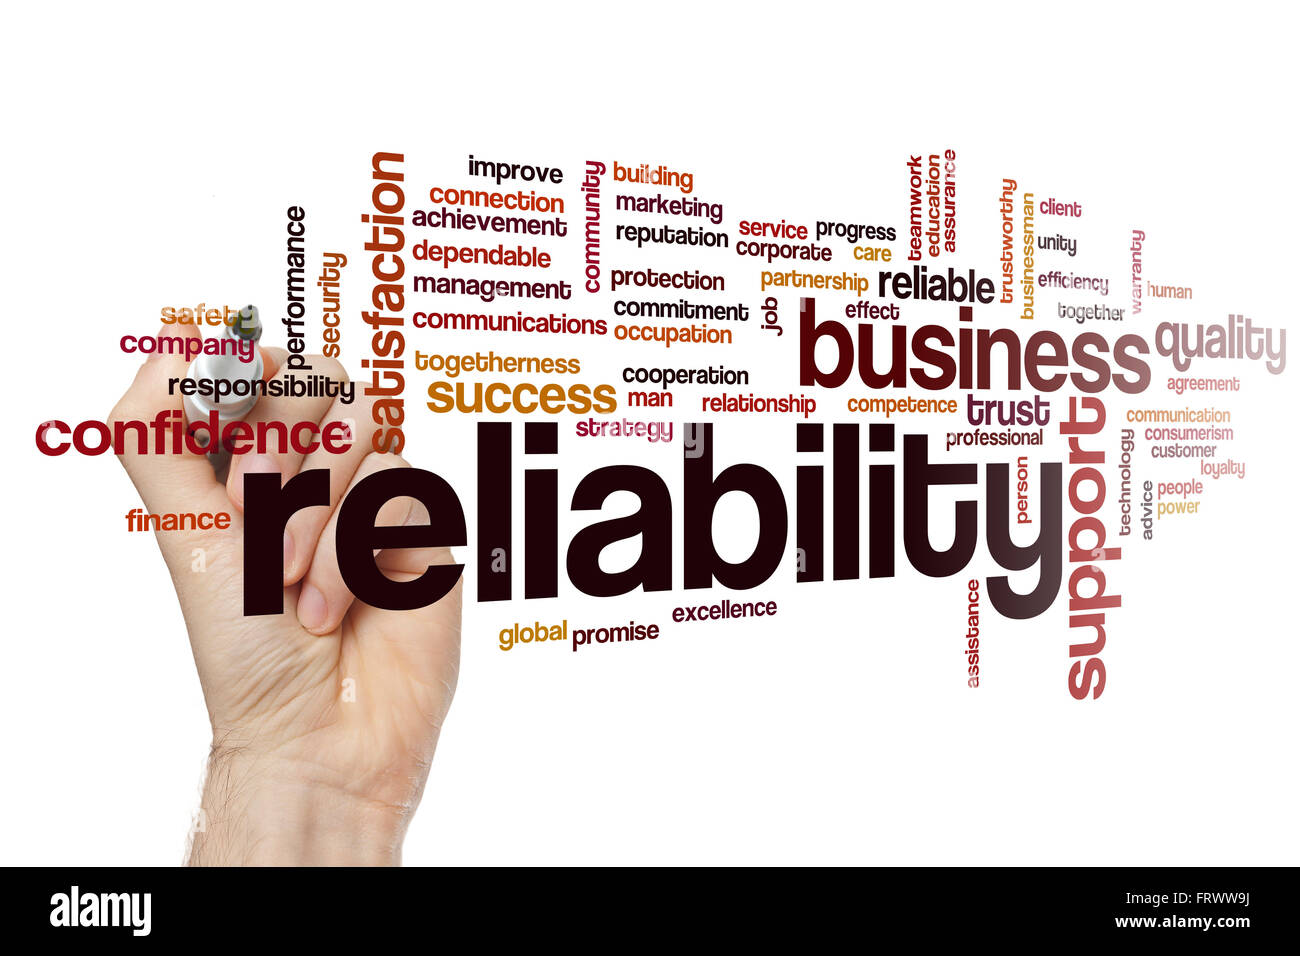 Reliability word cloud Stock Photo